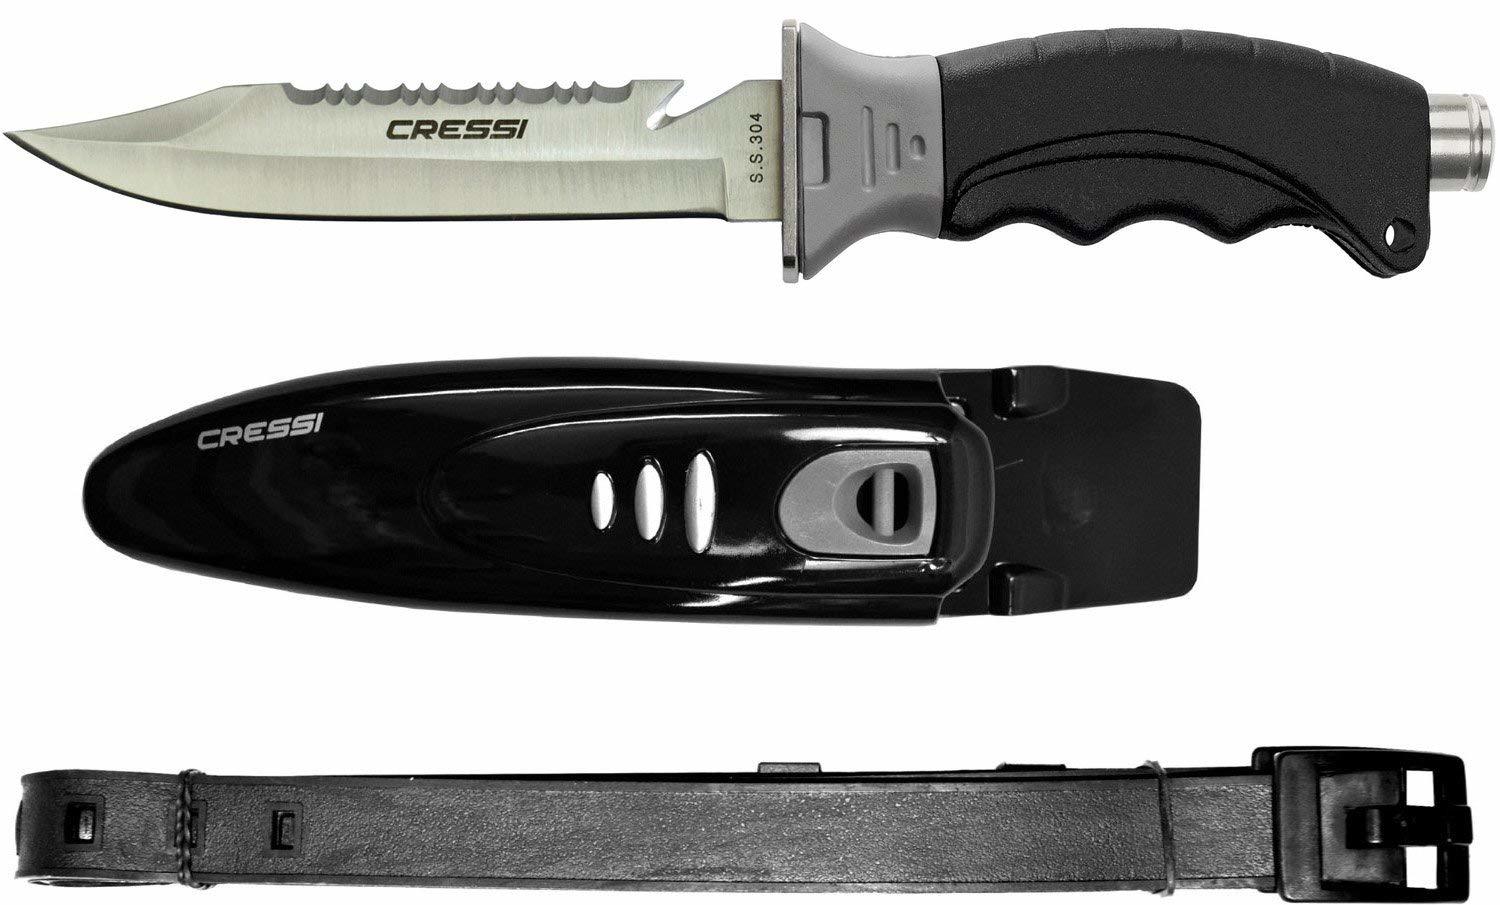 Cressi Borg, Long Blade Diving and Spearfishing Knife Review